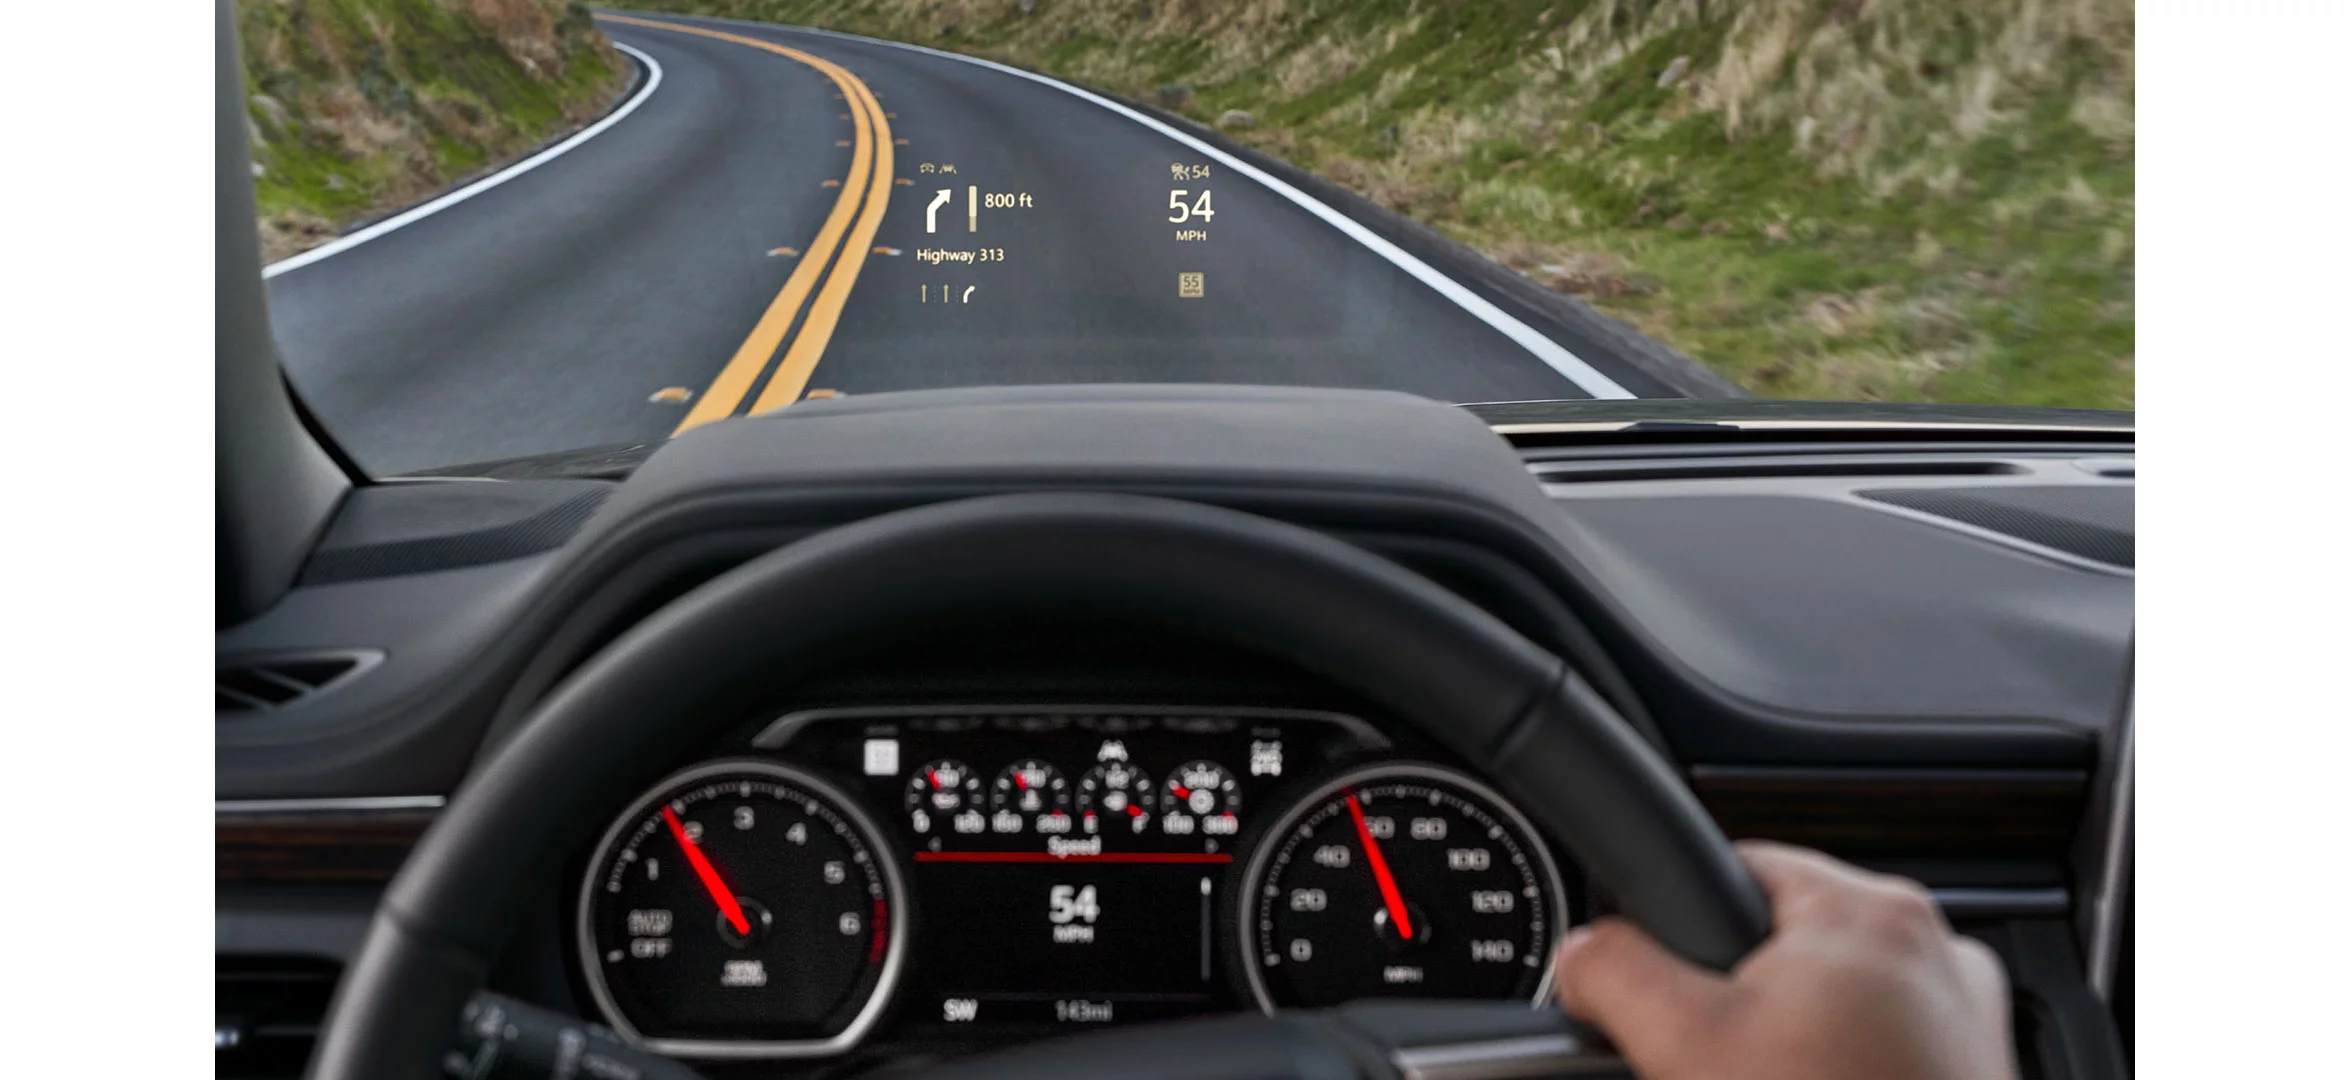 safety-head-up-display-2021tahoe_parallax